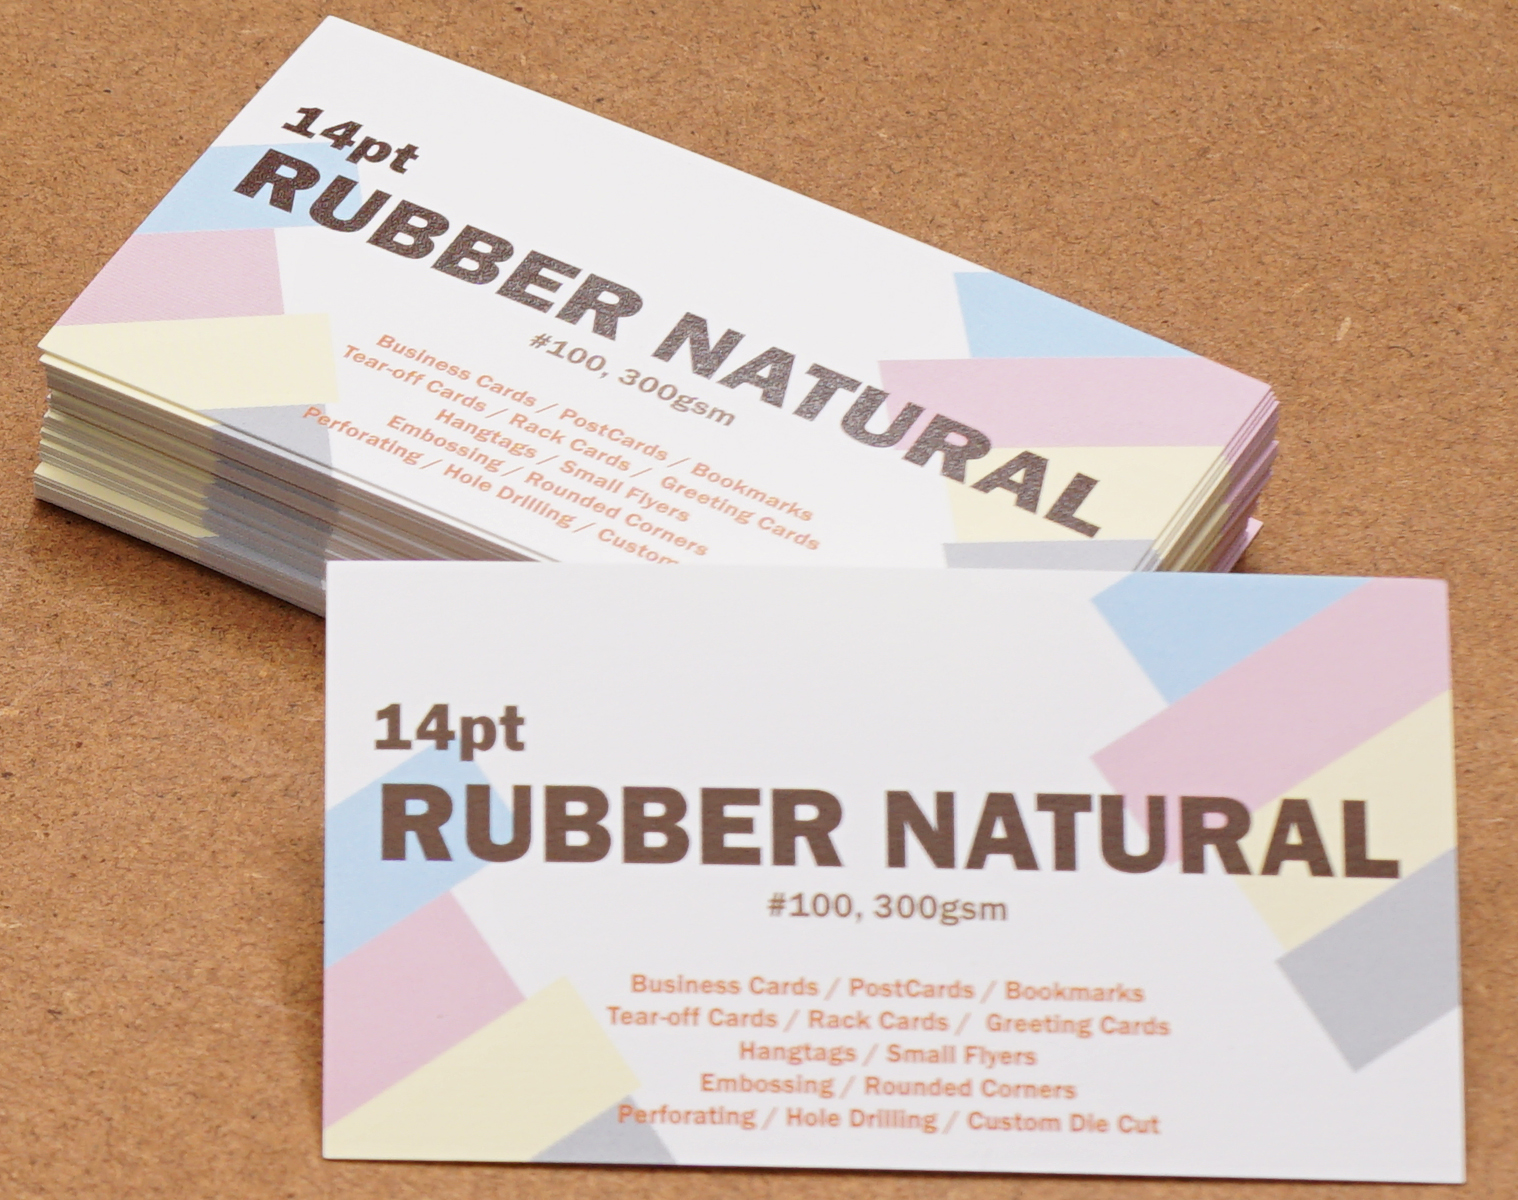 Rubber Natural Business Cards by Aladdin Print